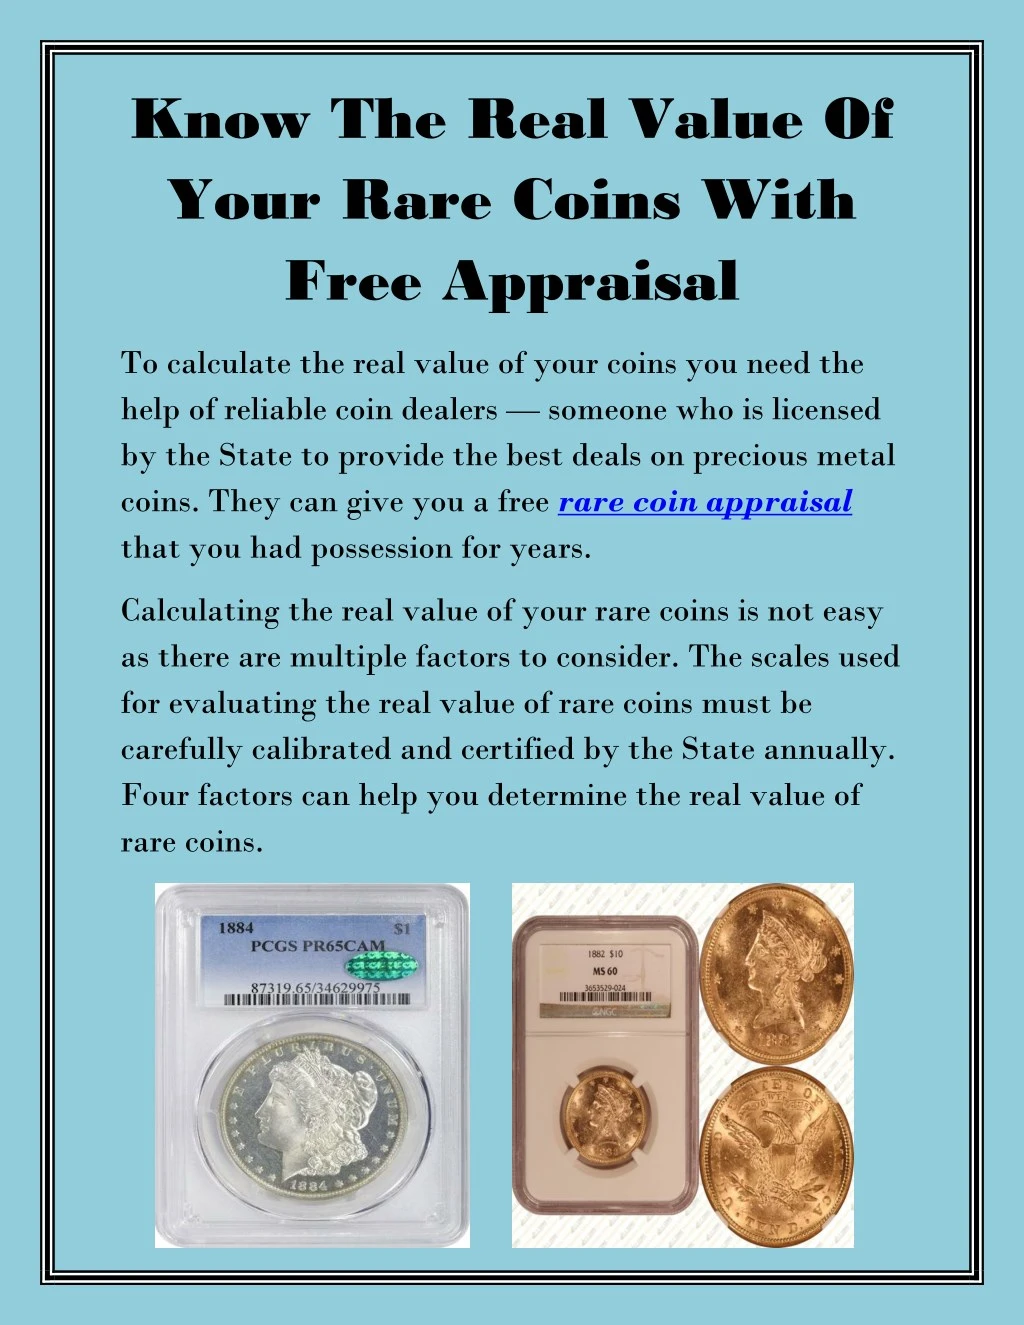 know the real value of your rare coins with free